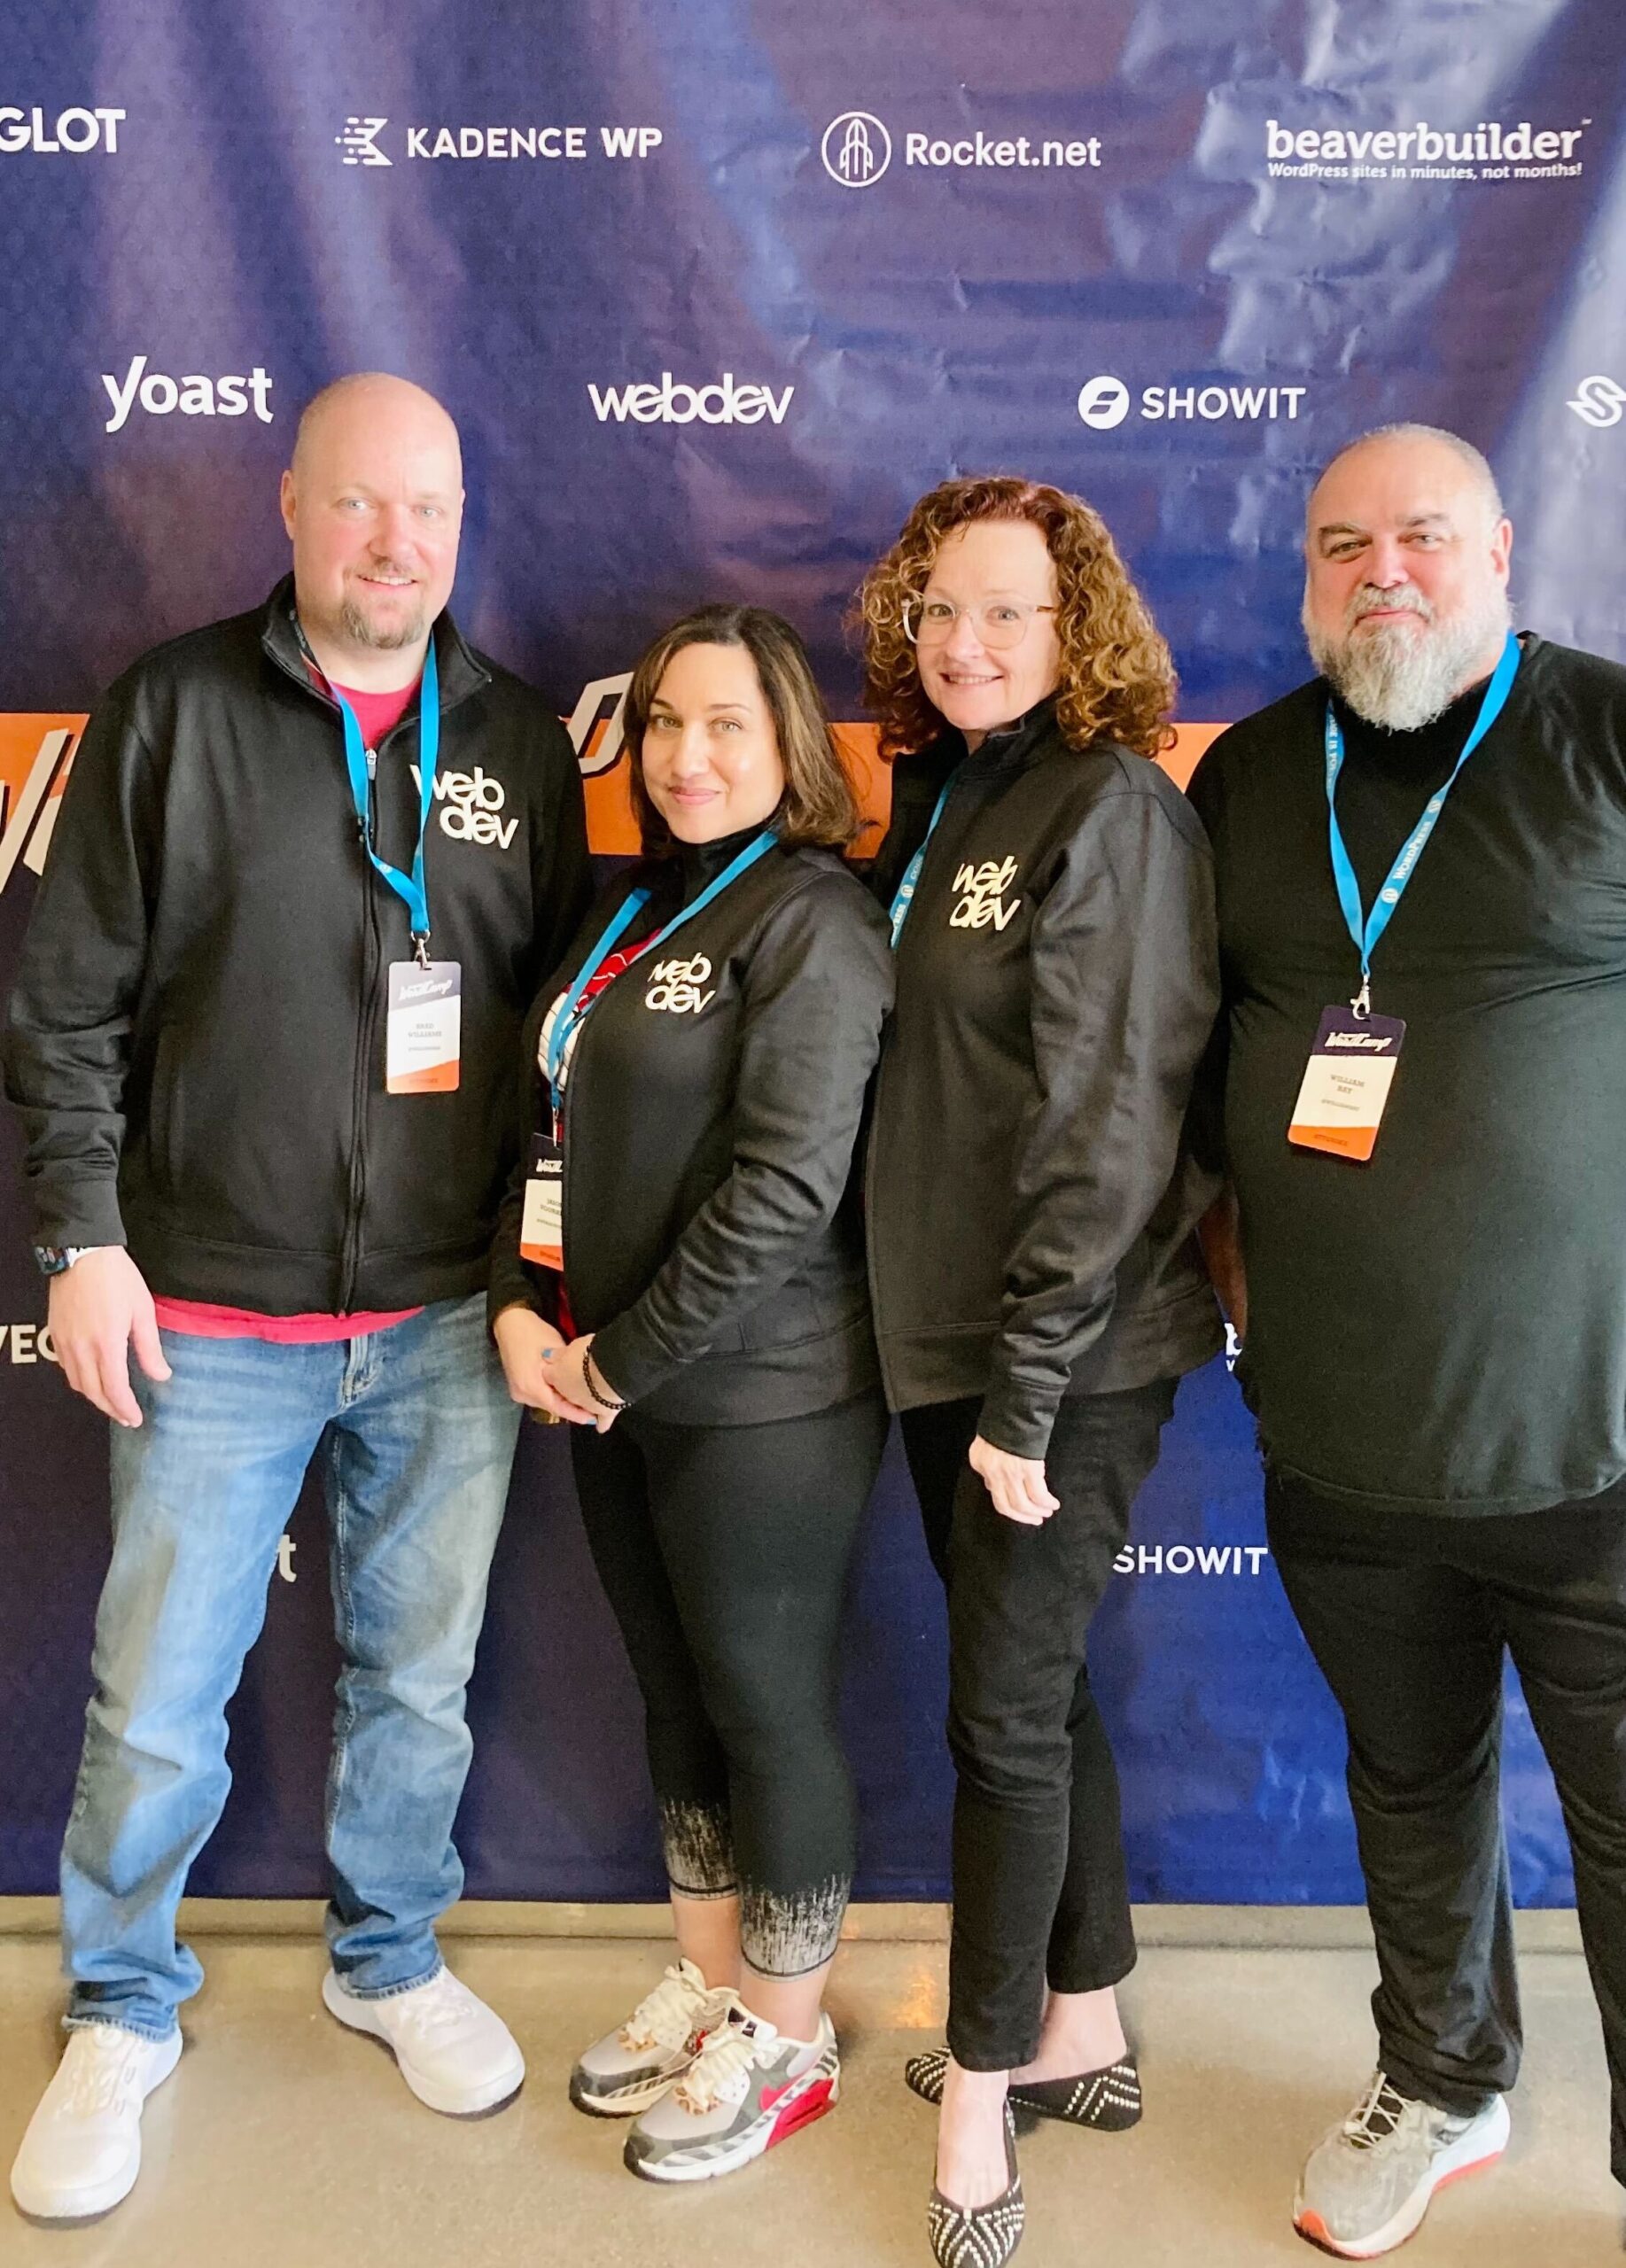 This is a photo of the team at WordCamp Phoenix standing in front of the event's backdrop, which features the WebDevStudios logo, among others. Standing left to right are CEO Brad Williams, Marketing Manager, Laura Coronado, Account Manager, Laura Byrne, and Frontend Engineer, William Bay.